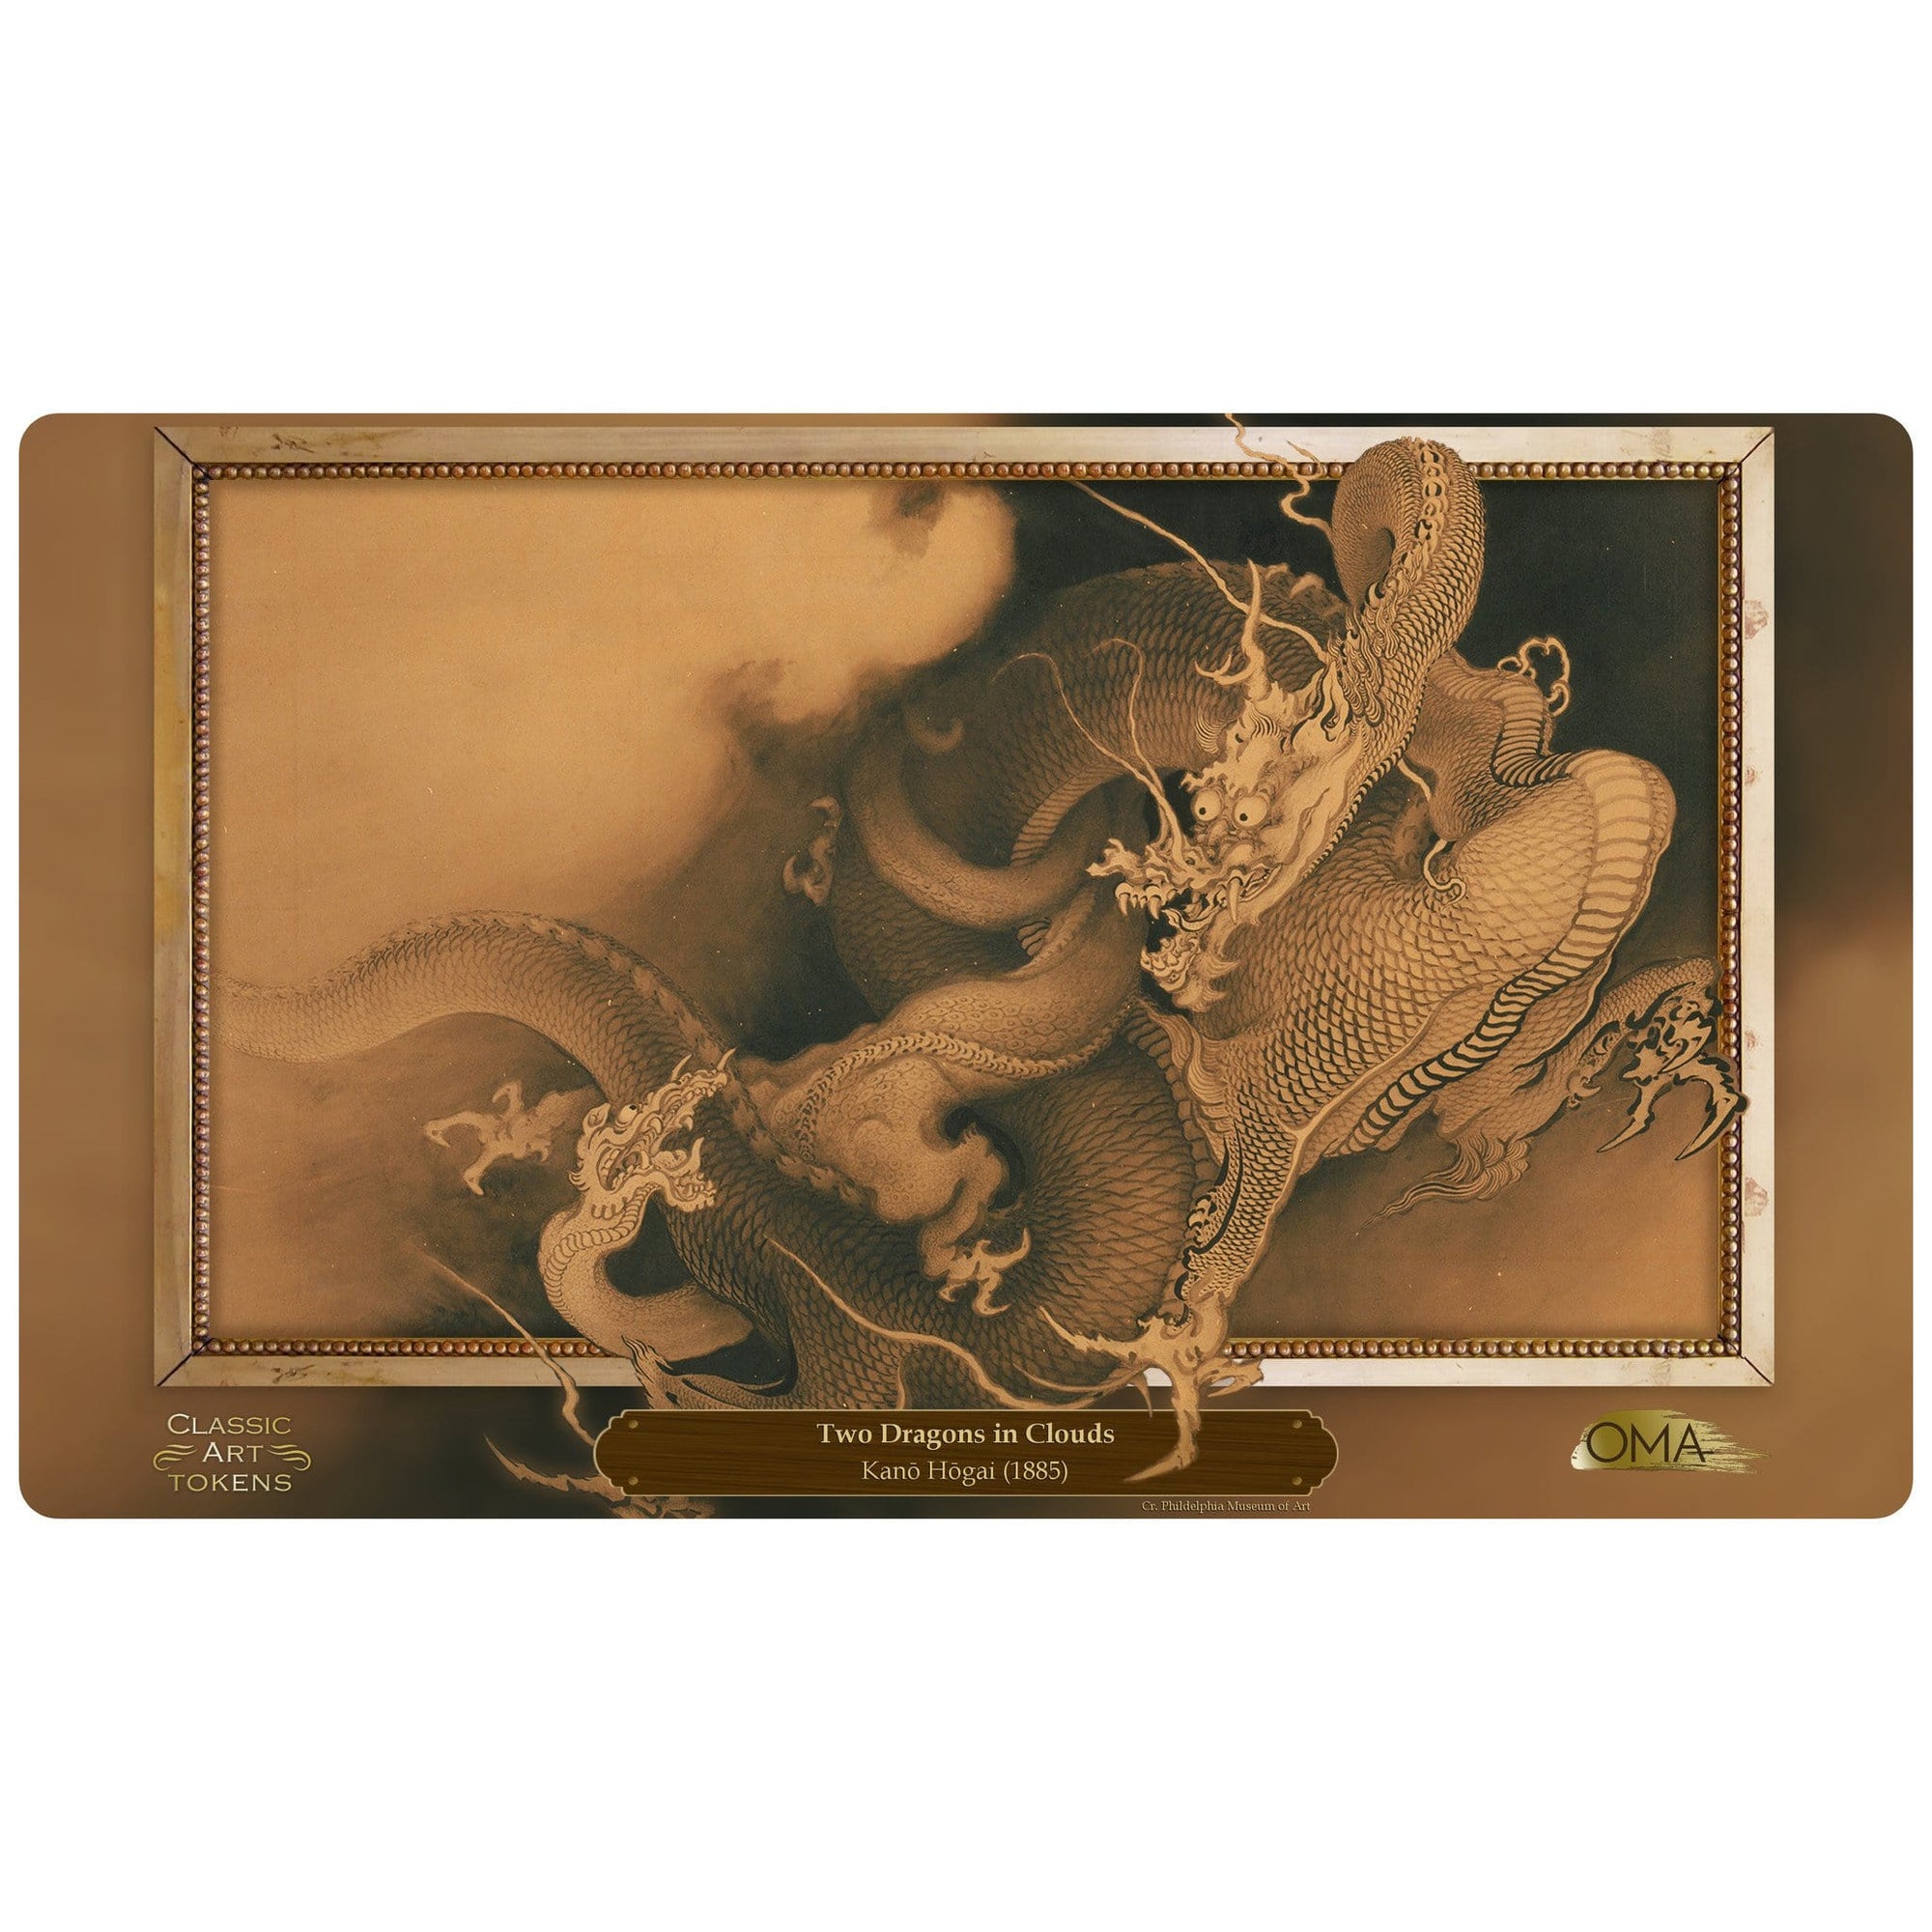 Dragon Playmat by Kanō Hōgai - Playmat - Original Magic Art - Accessories for Magic the Gathering and other card games